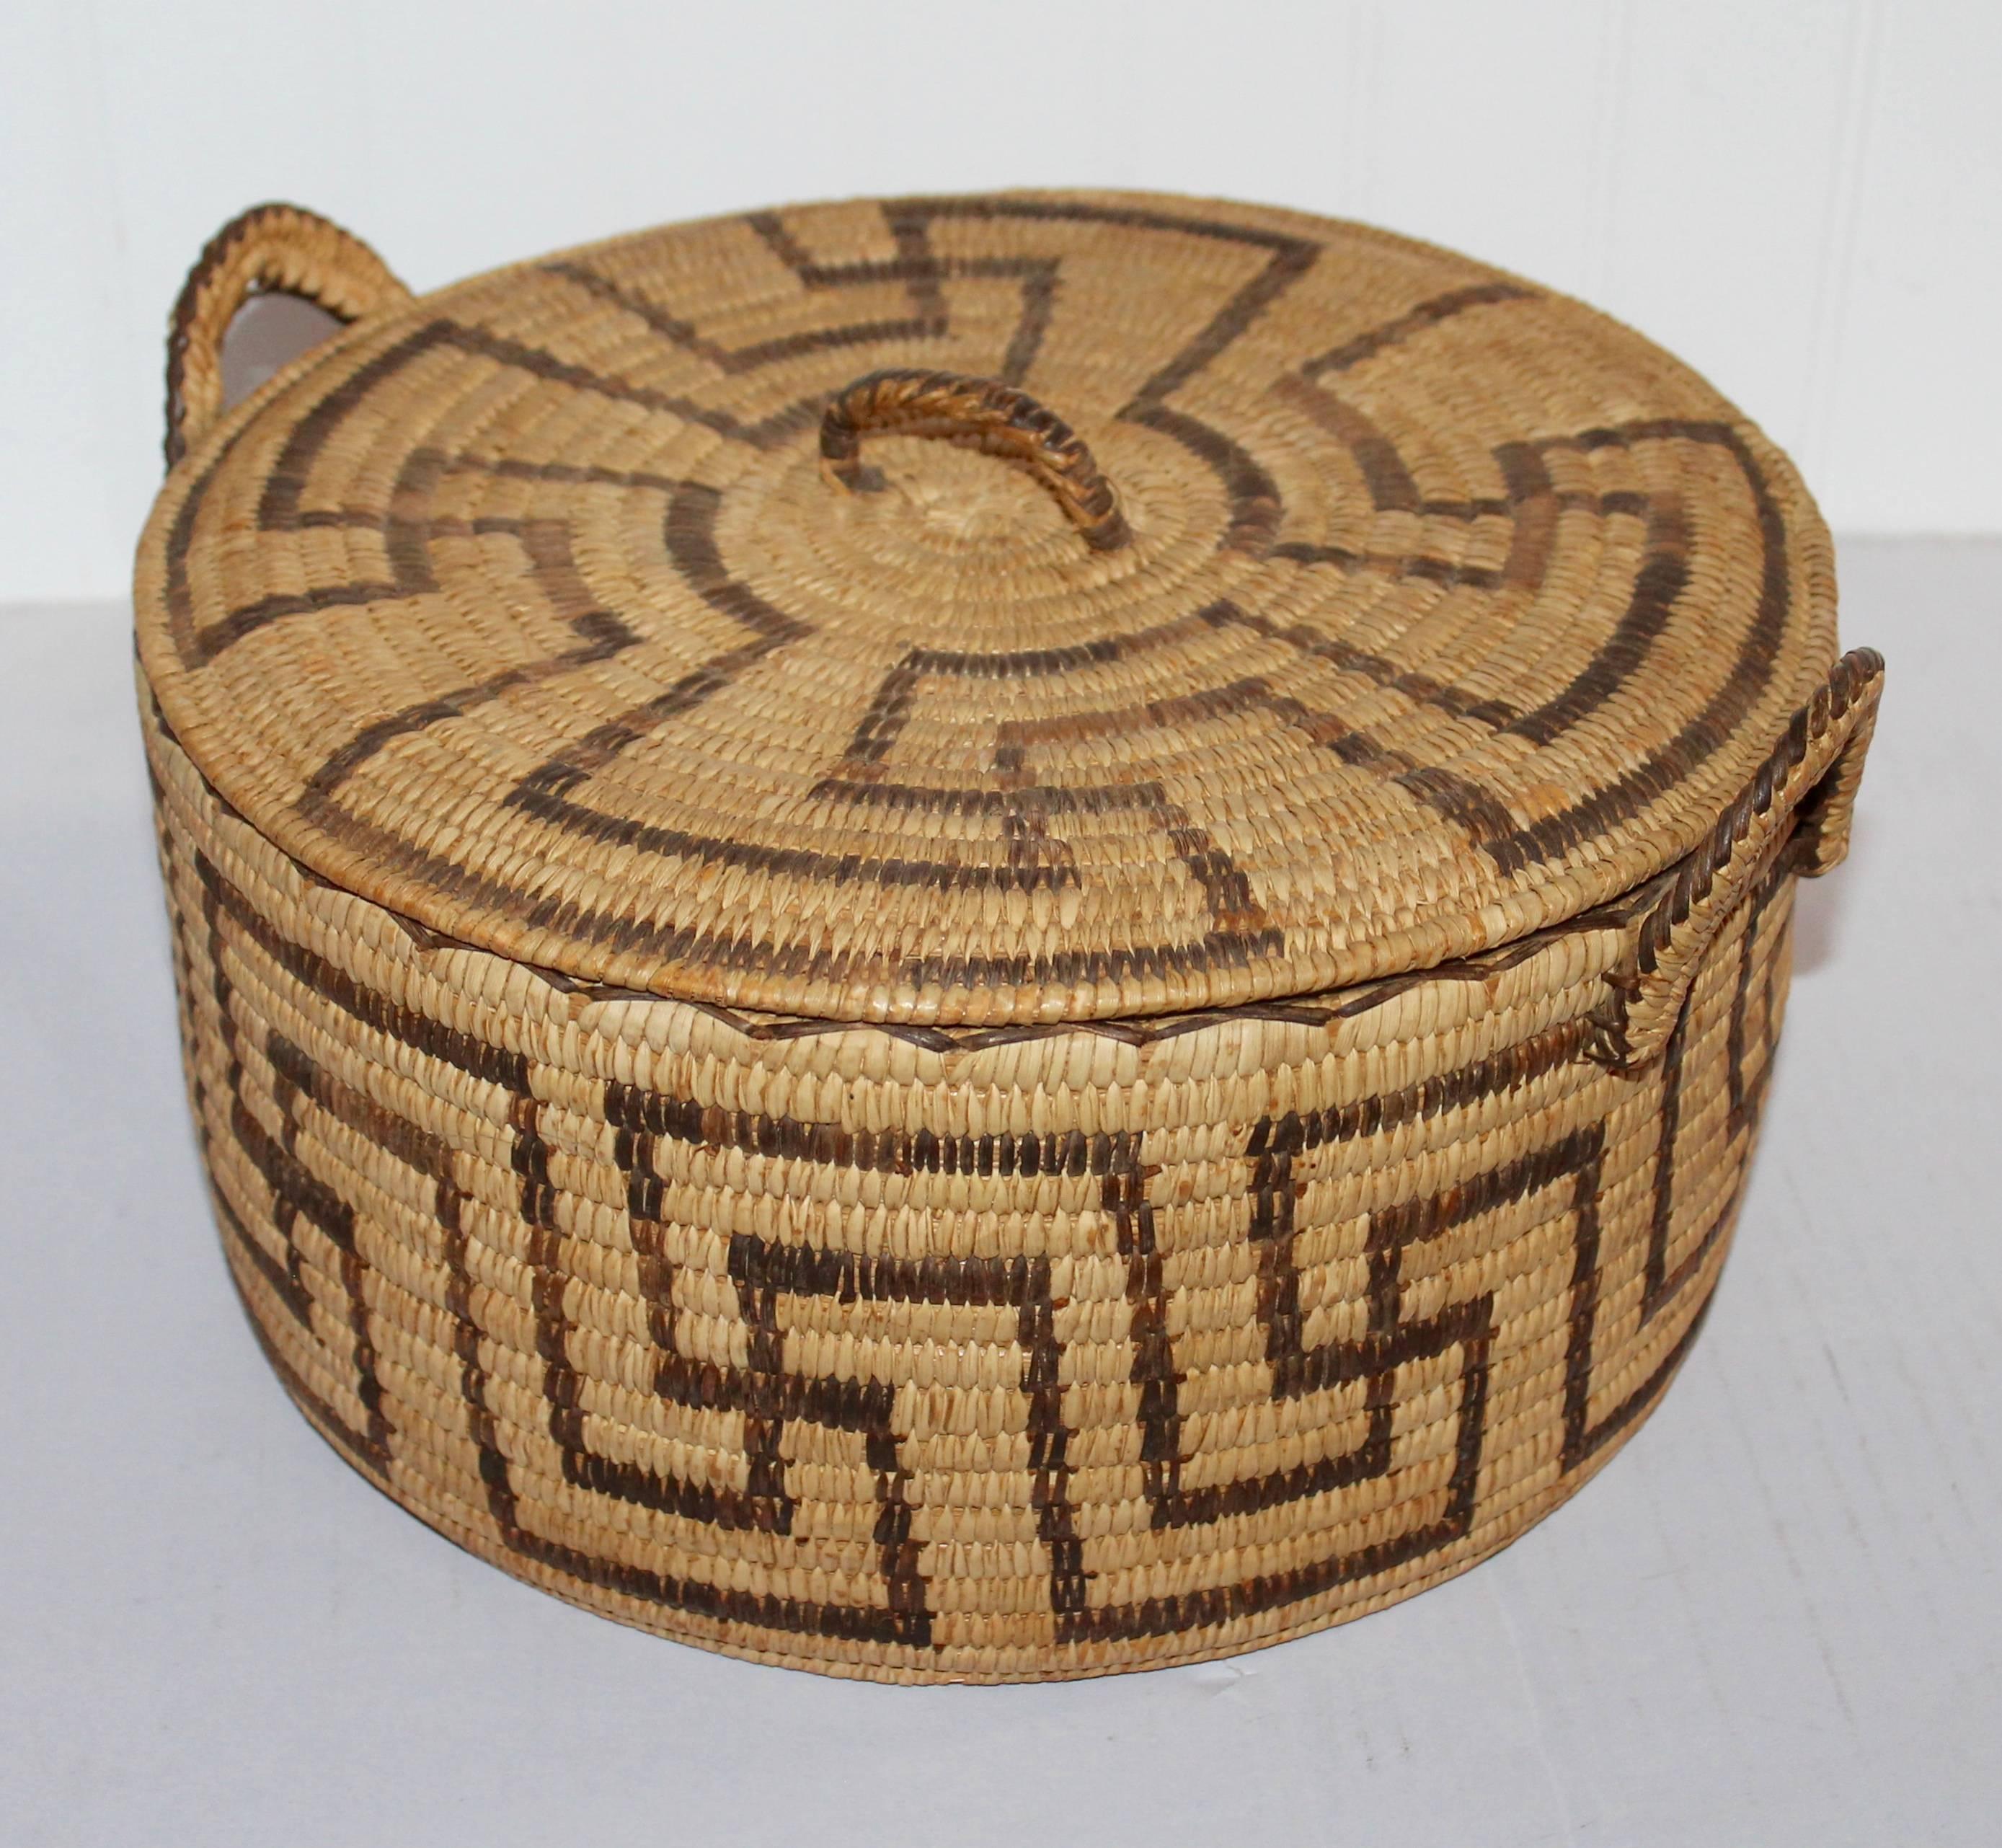 This amazing and quite rare Papago Lided basket s in fine as found condition. This unusual geometric pattern is also the same throughout the lid. The condition is pristine.